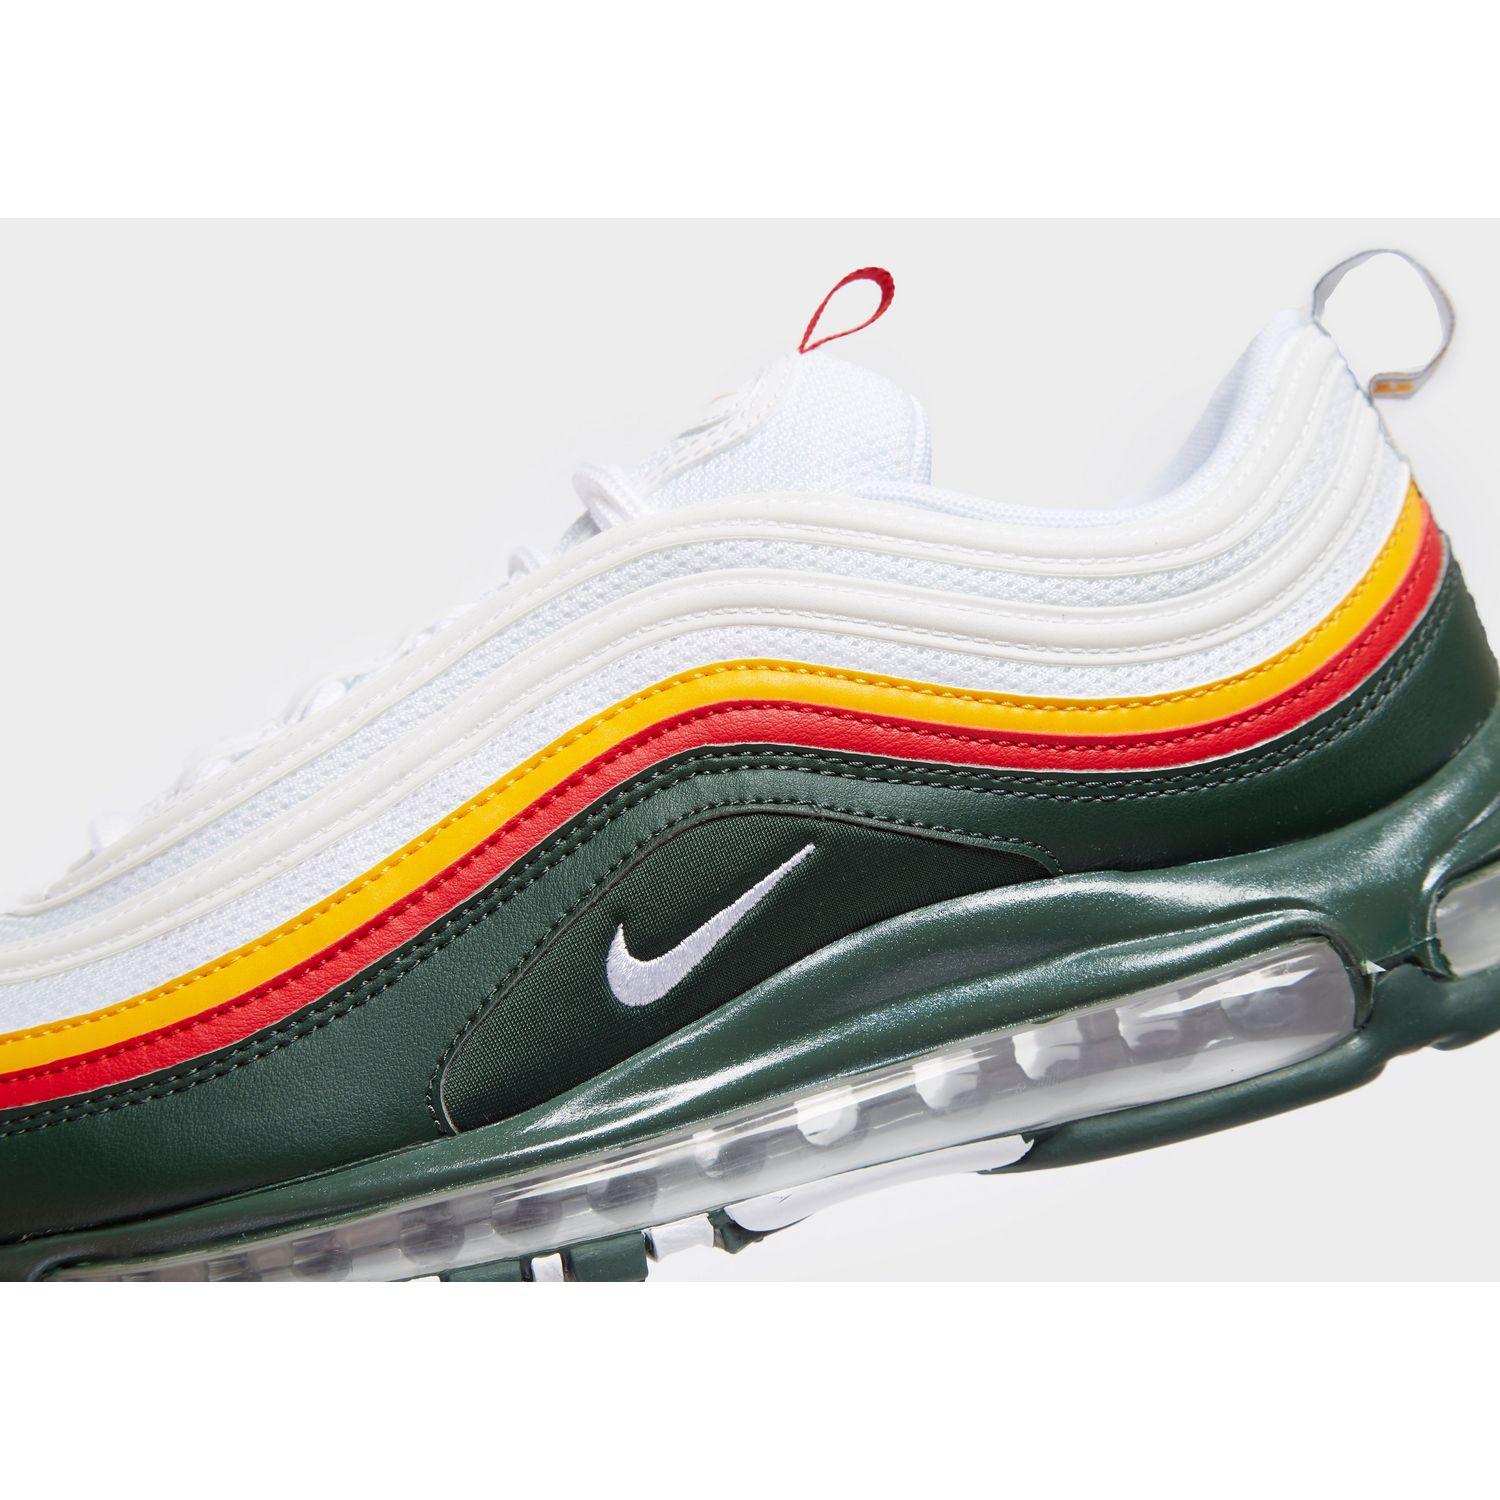 nike air max 97 yellow red 